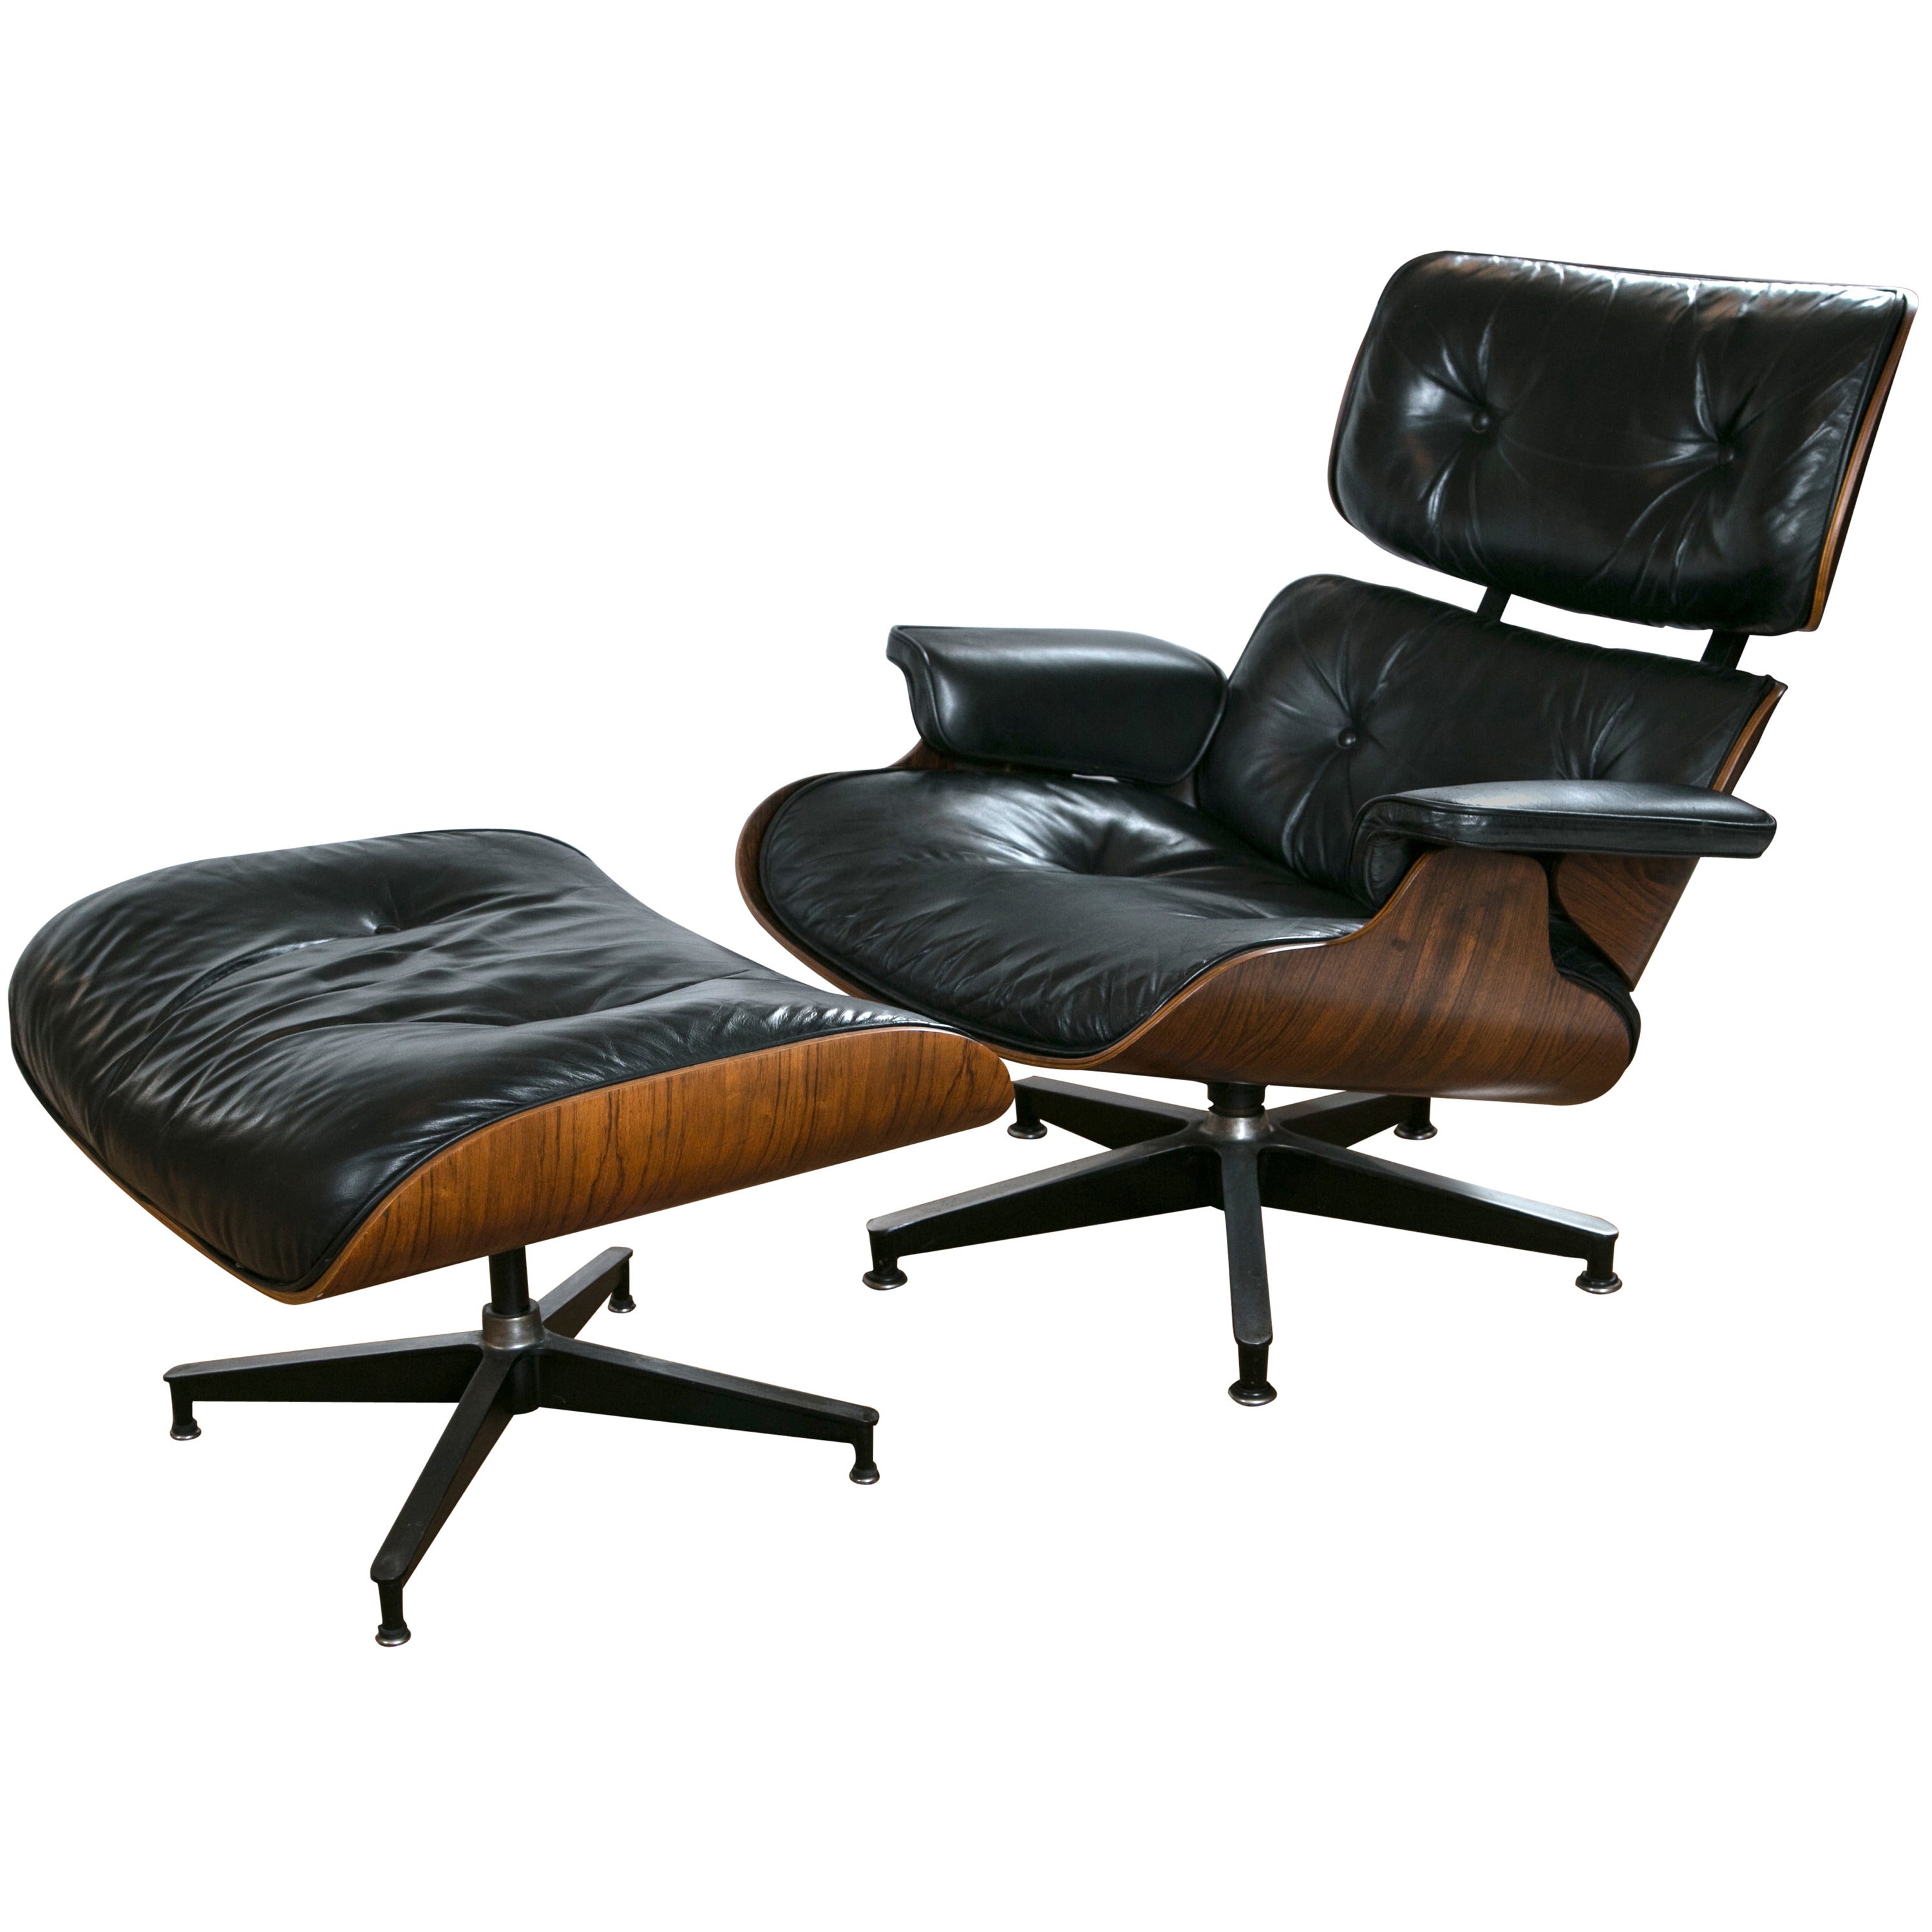 Vintage Eames Lounge Chair and Ottoman